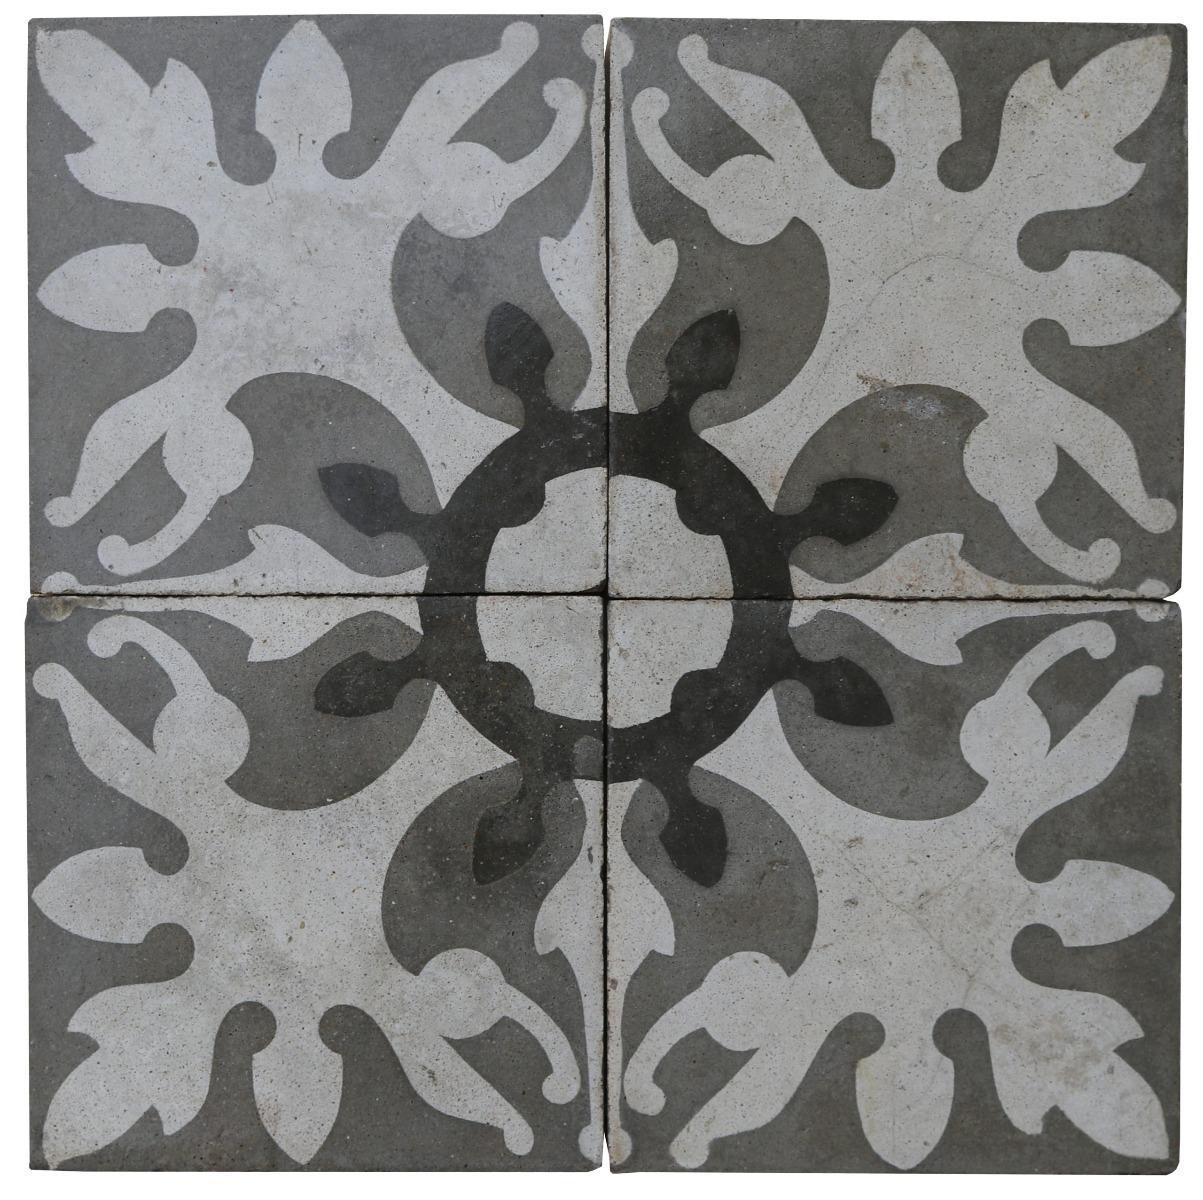 A set of 90 reclaimed encaustic cement tiles. These tiles will cover 3.6 m2 or 38 sq ft.